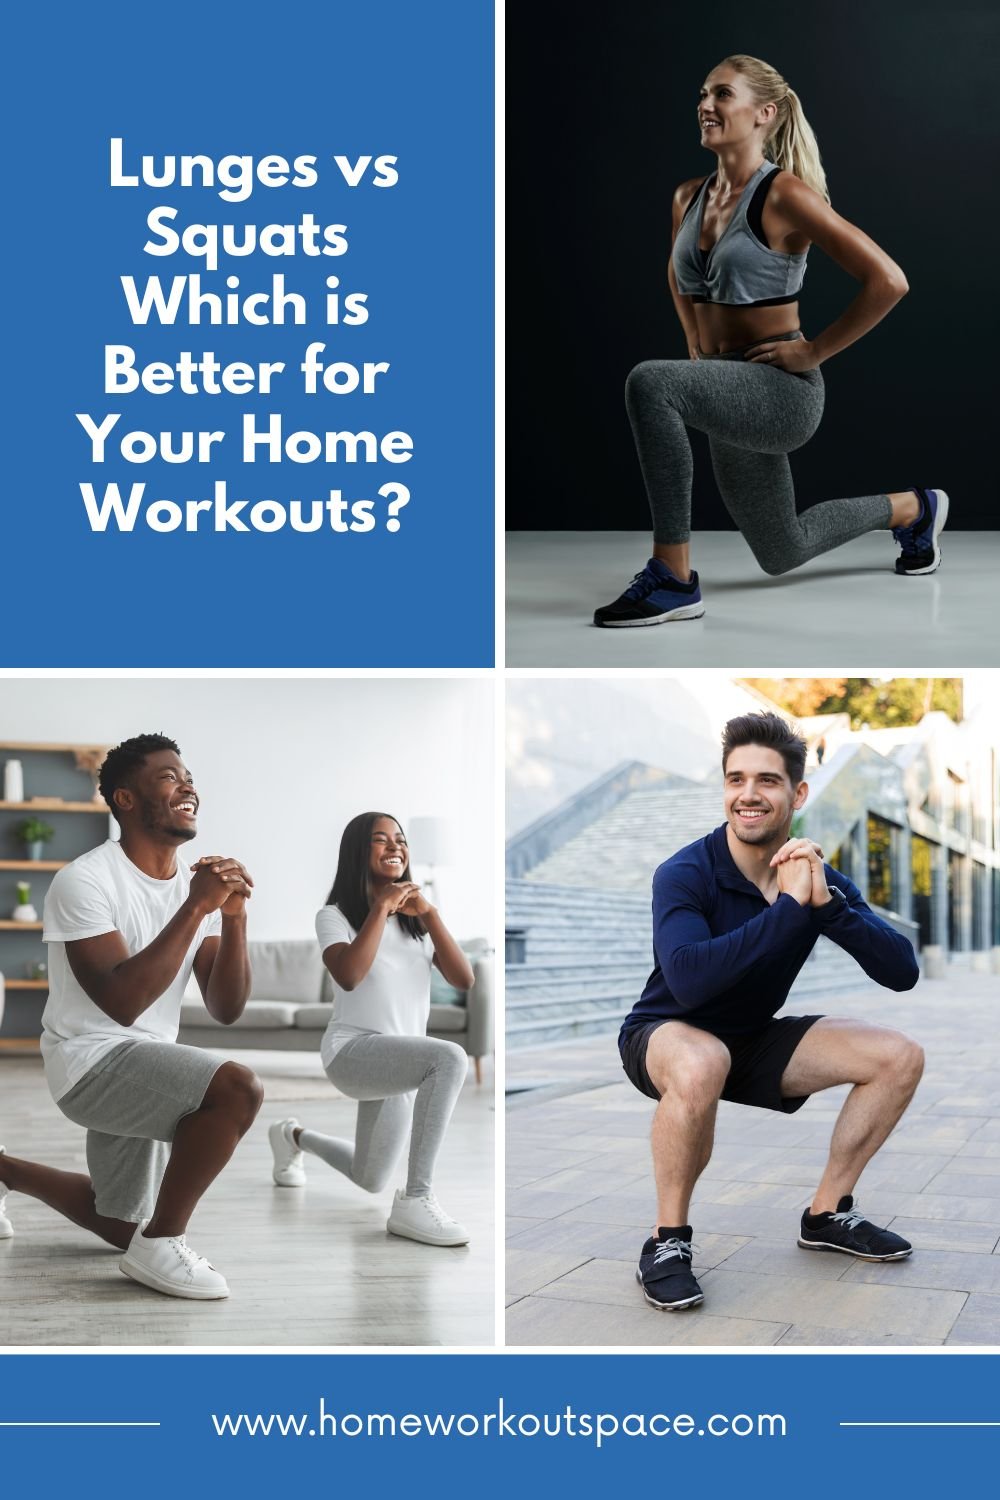 Lunges vs Squats Which is Better for Your Home Workouts